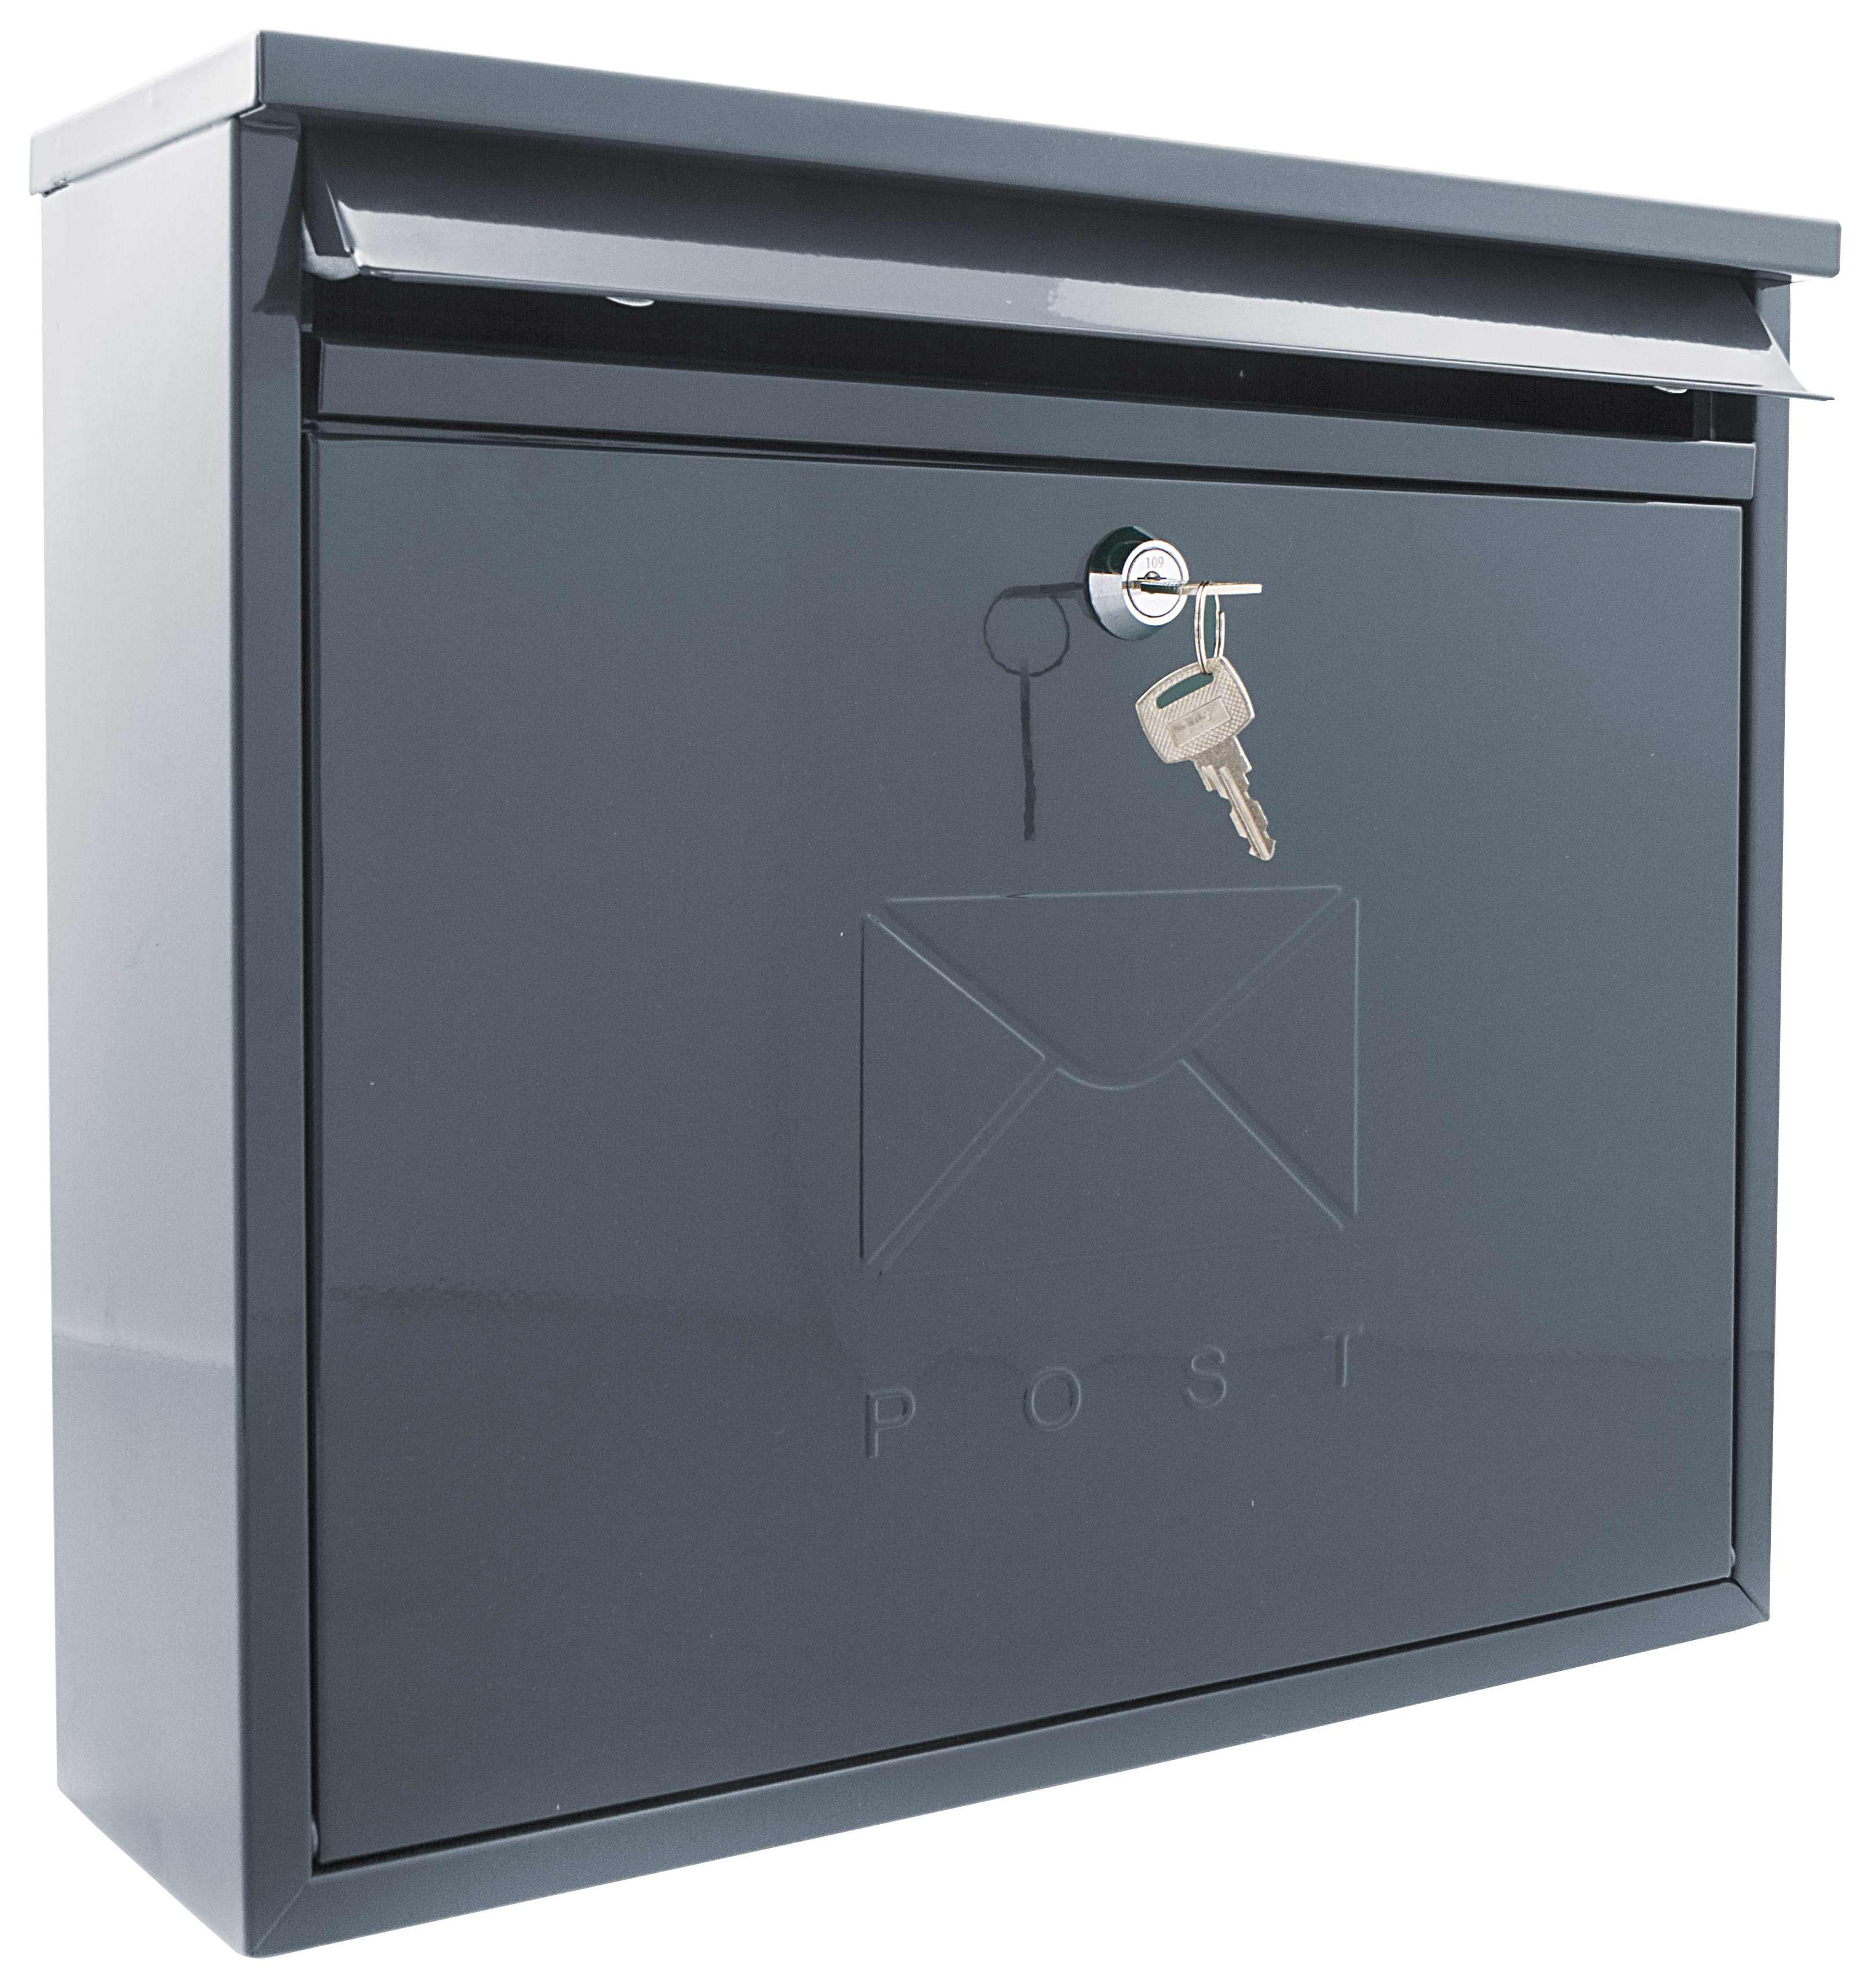 Burg-Wachter Anthracite Elegance Wall Mounted Postbox - 310 x 362 x 112mm